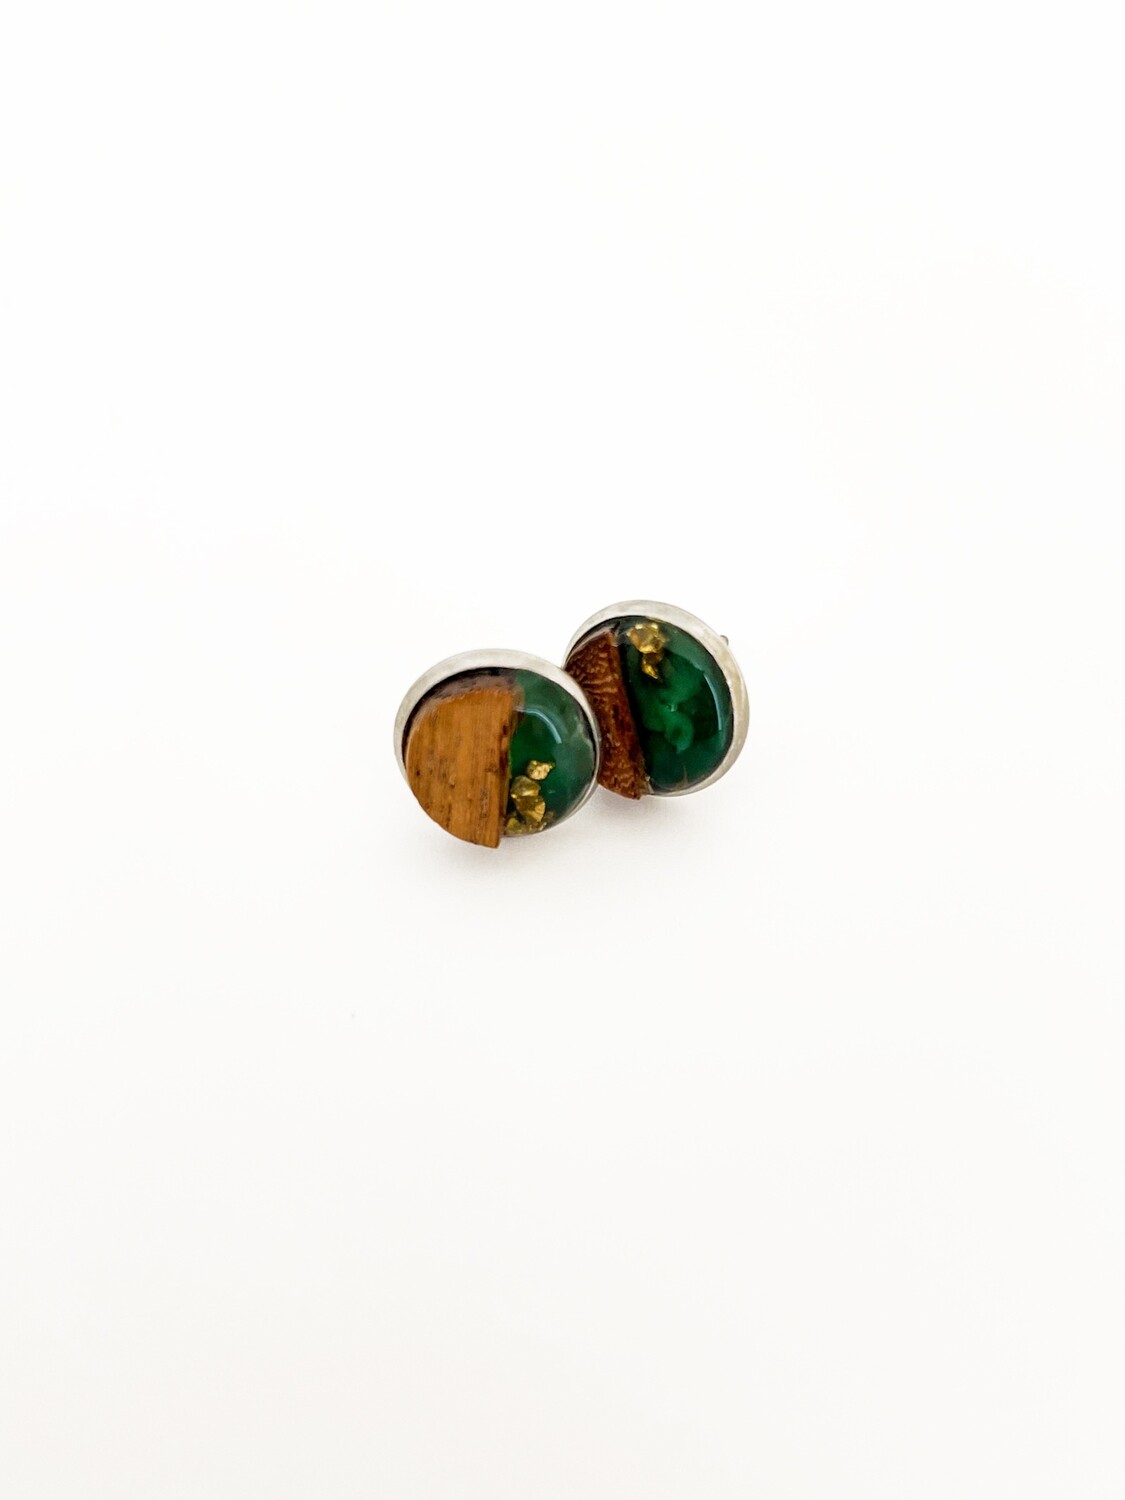 Recycled Plastic Stud Earrings - Green Gold